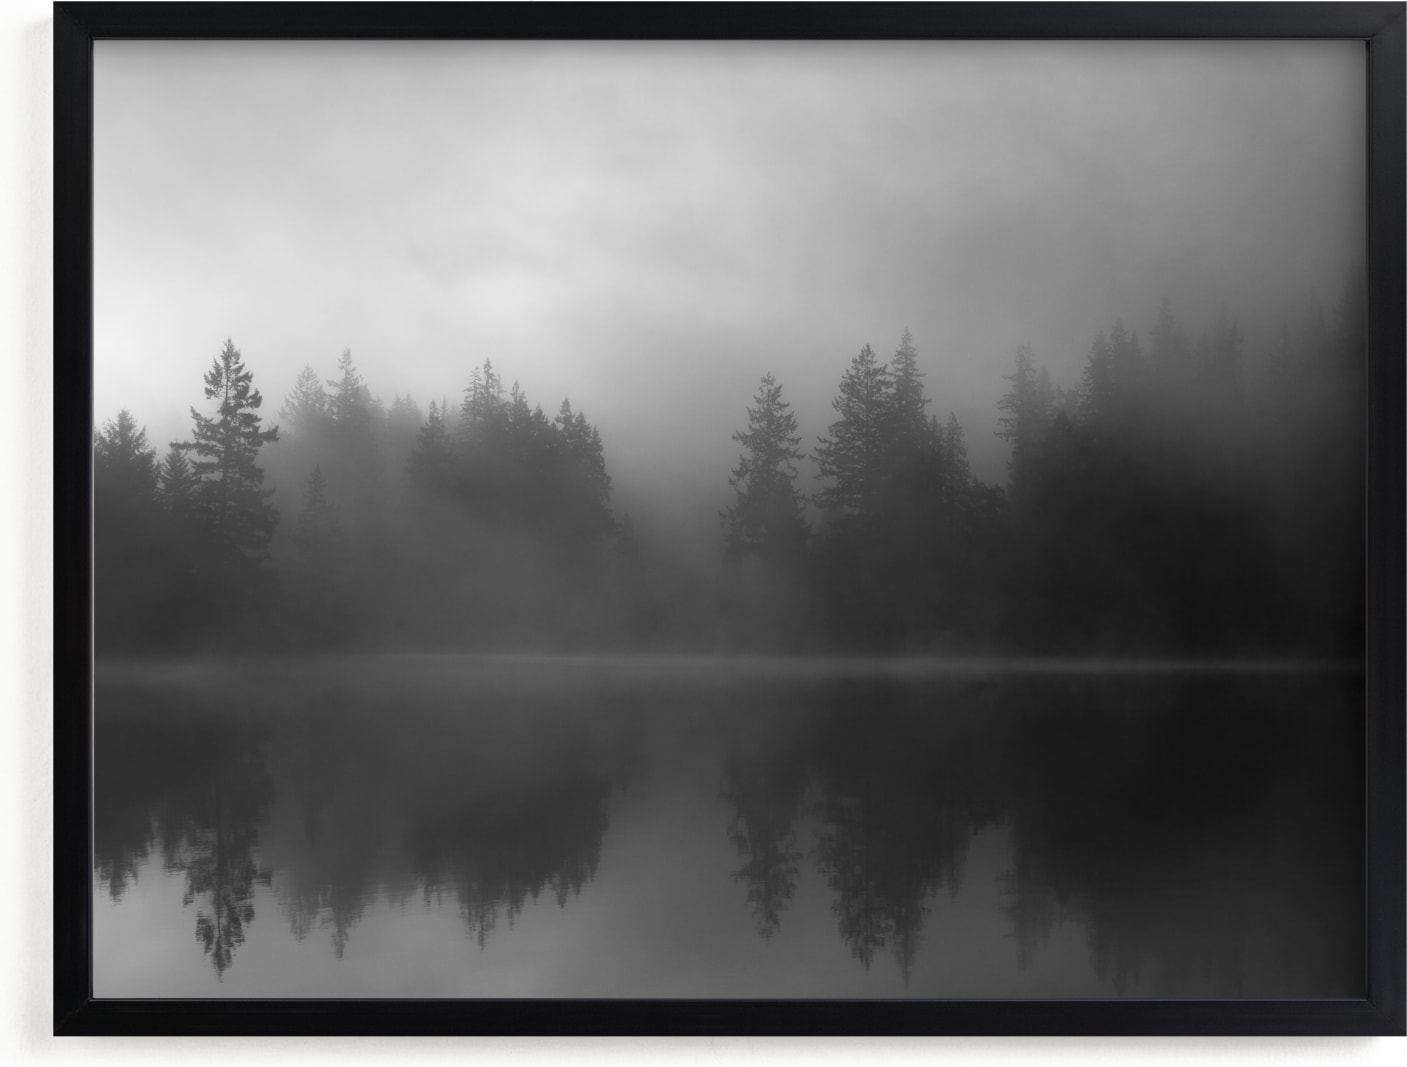 This is a grey art by Jennifer Morrow called Fog Reflection.